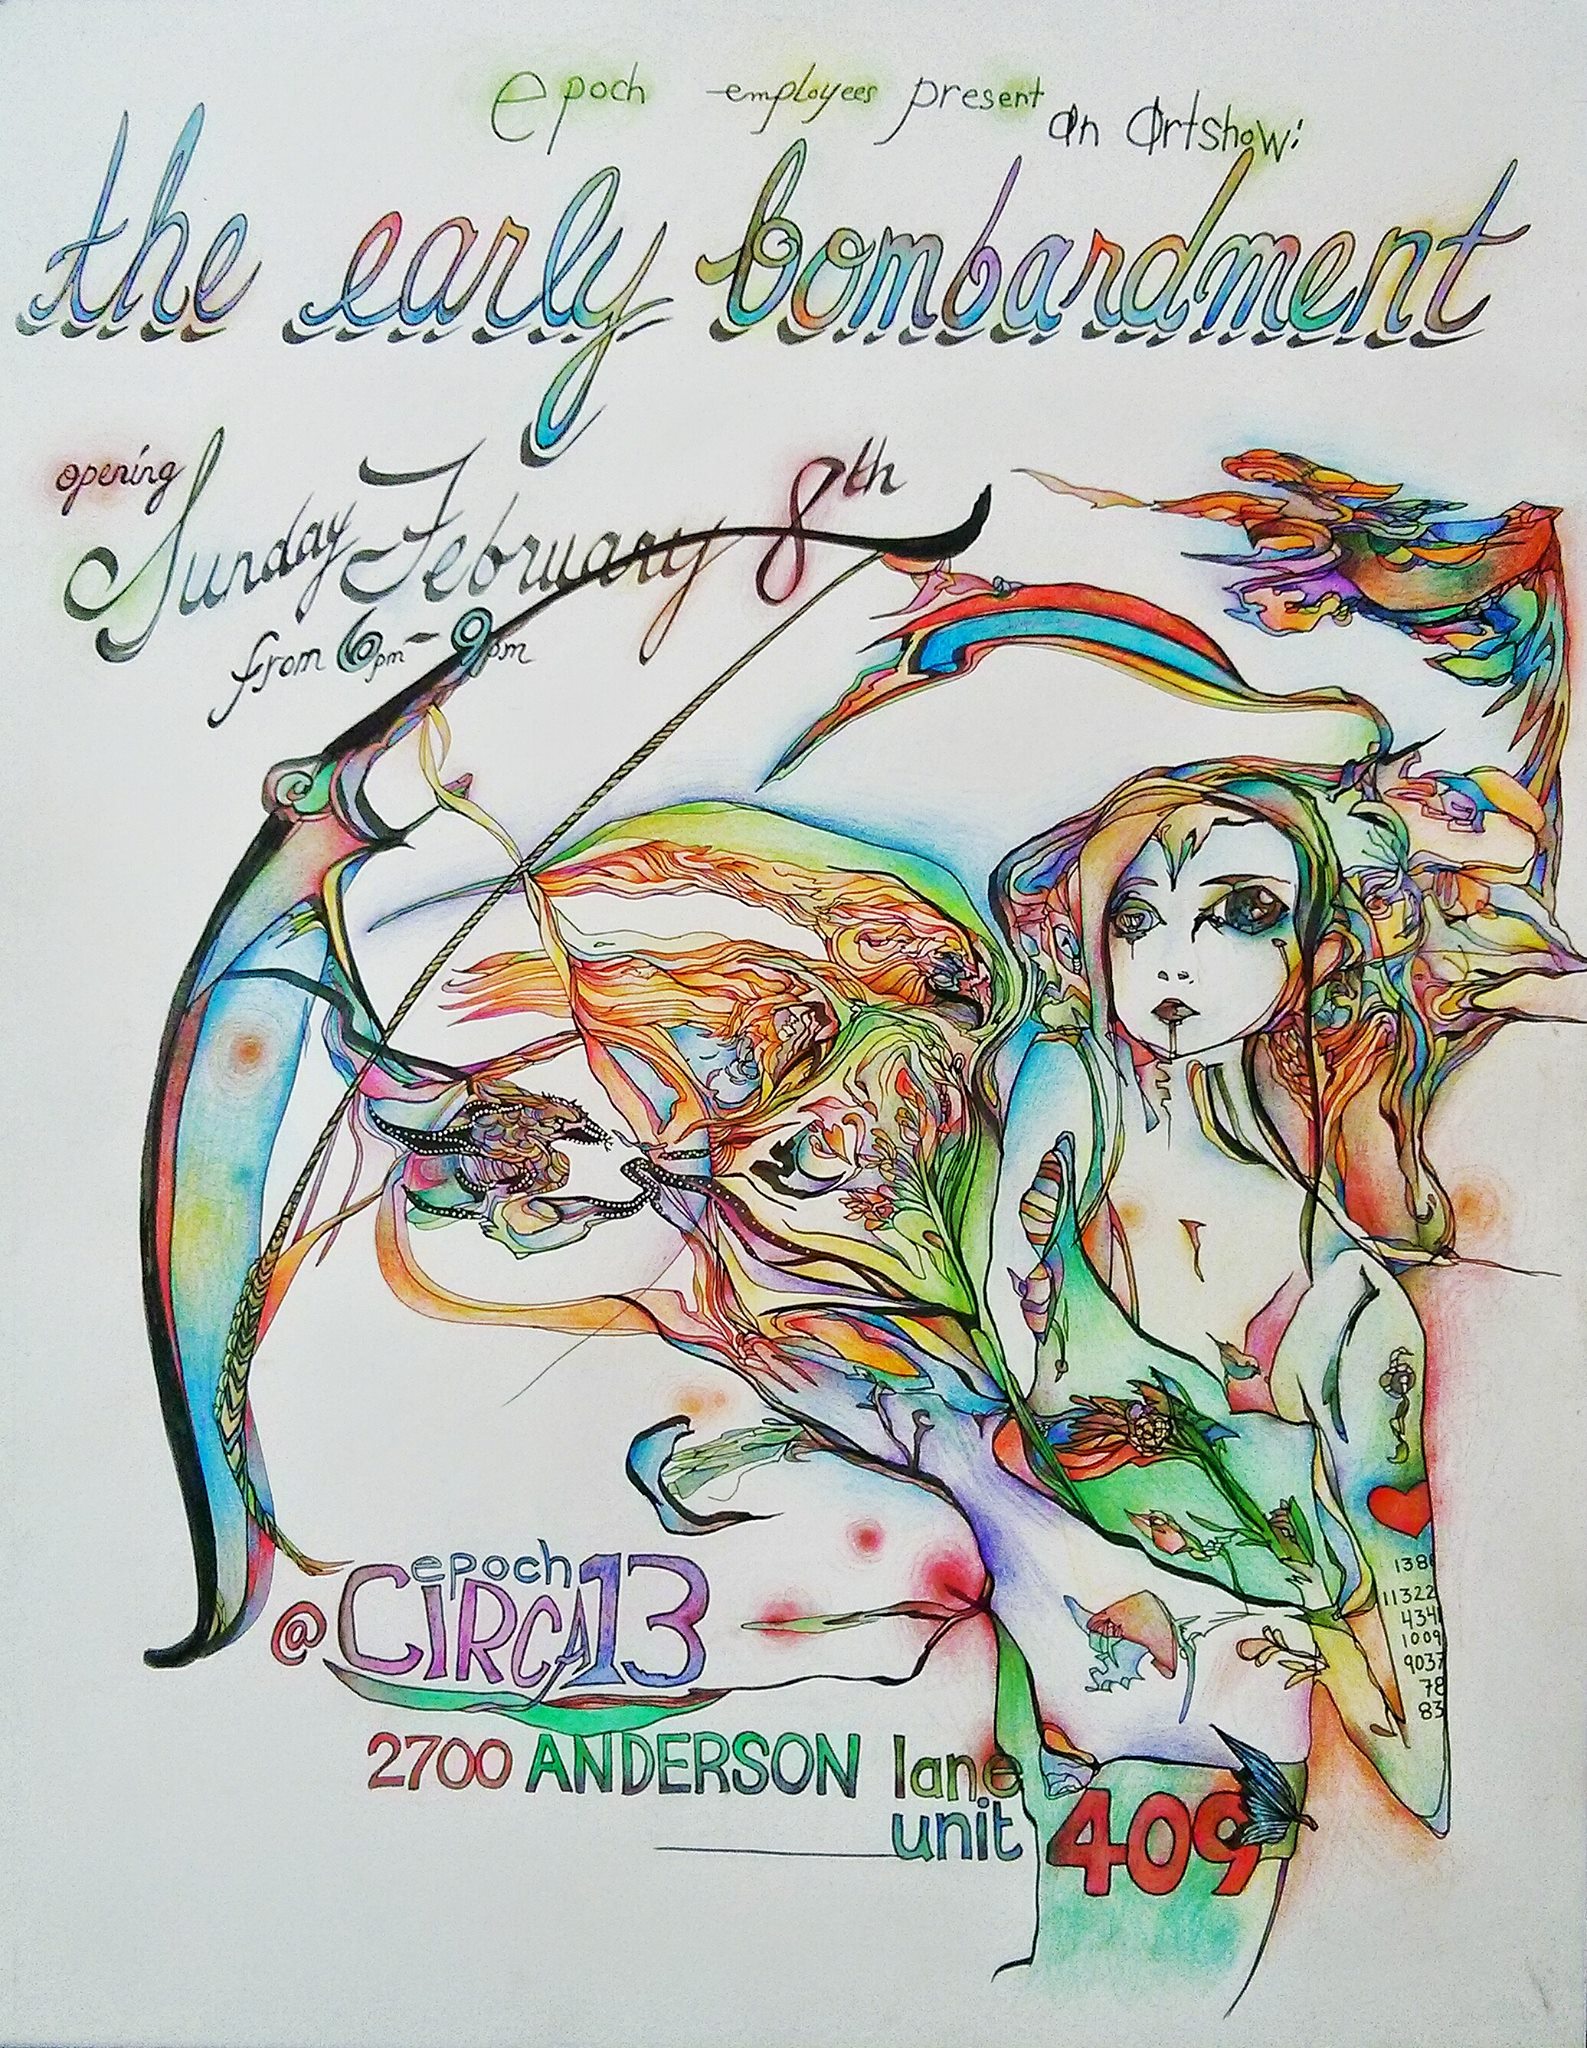 The Elemental Employees of Epoch present THE EARLY BOMBARDMENT; an art opening and showcase of our talents